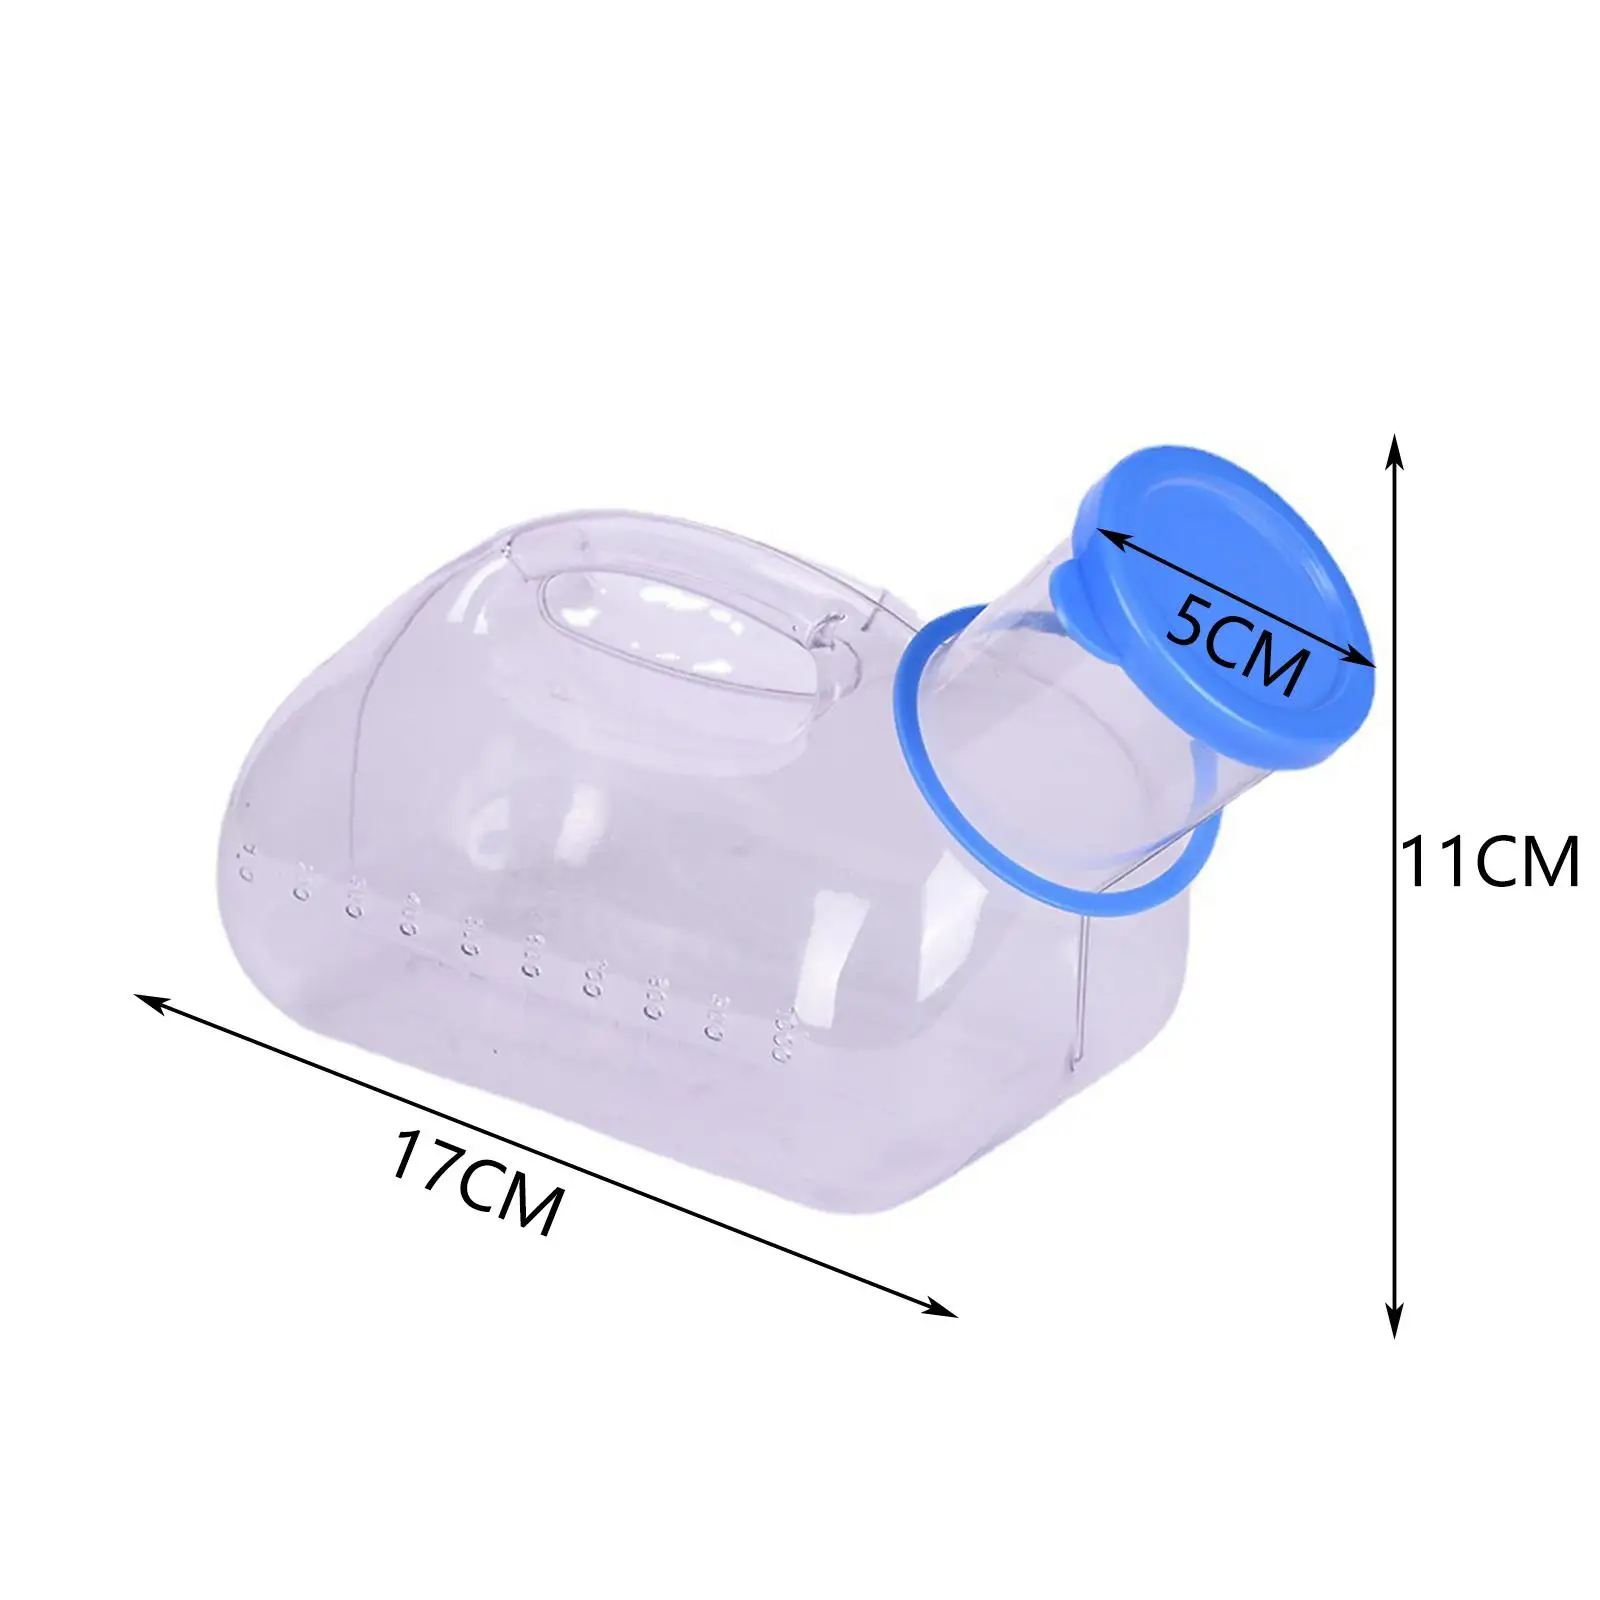 Portable Urinal Bottle Plastic Bedpans for Urine Collection Outdoor Patient 1000ml Urine Jar with caps Lid Spill Proof Camping